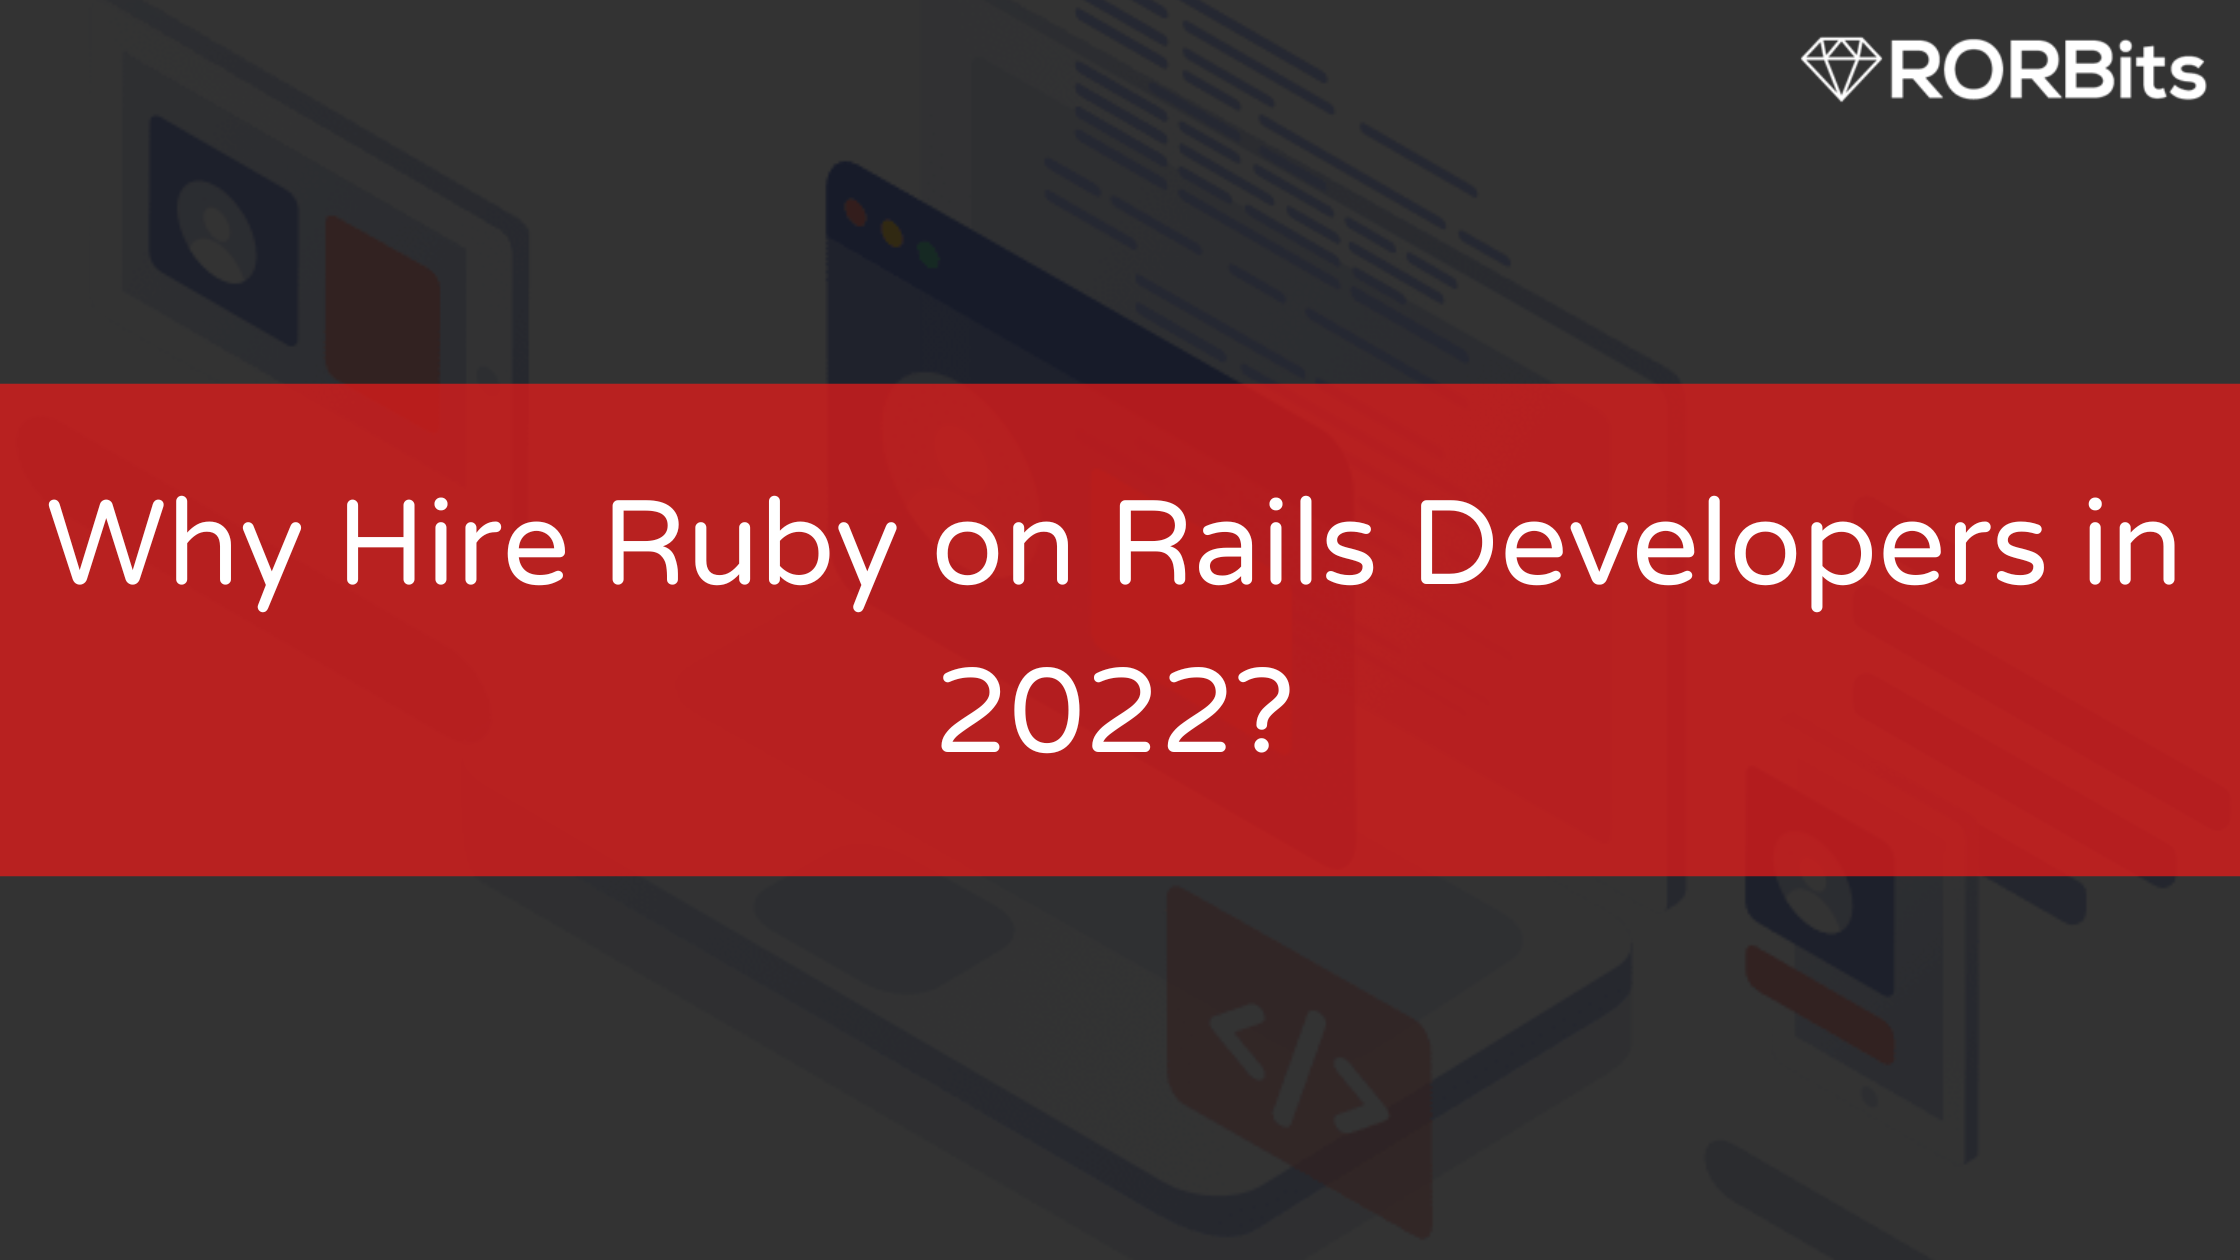 Why Hire Ruby on Rails Developers in 2022?